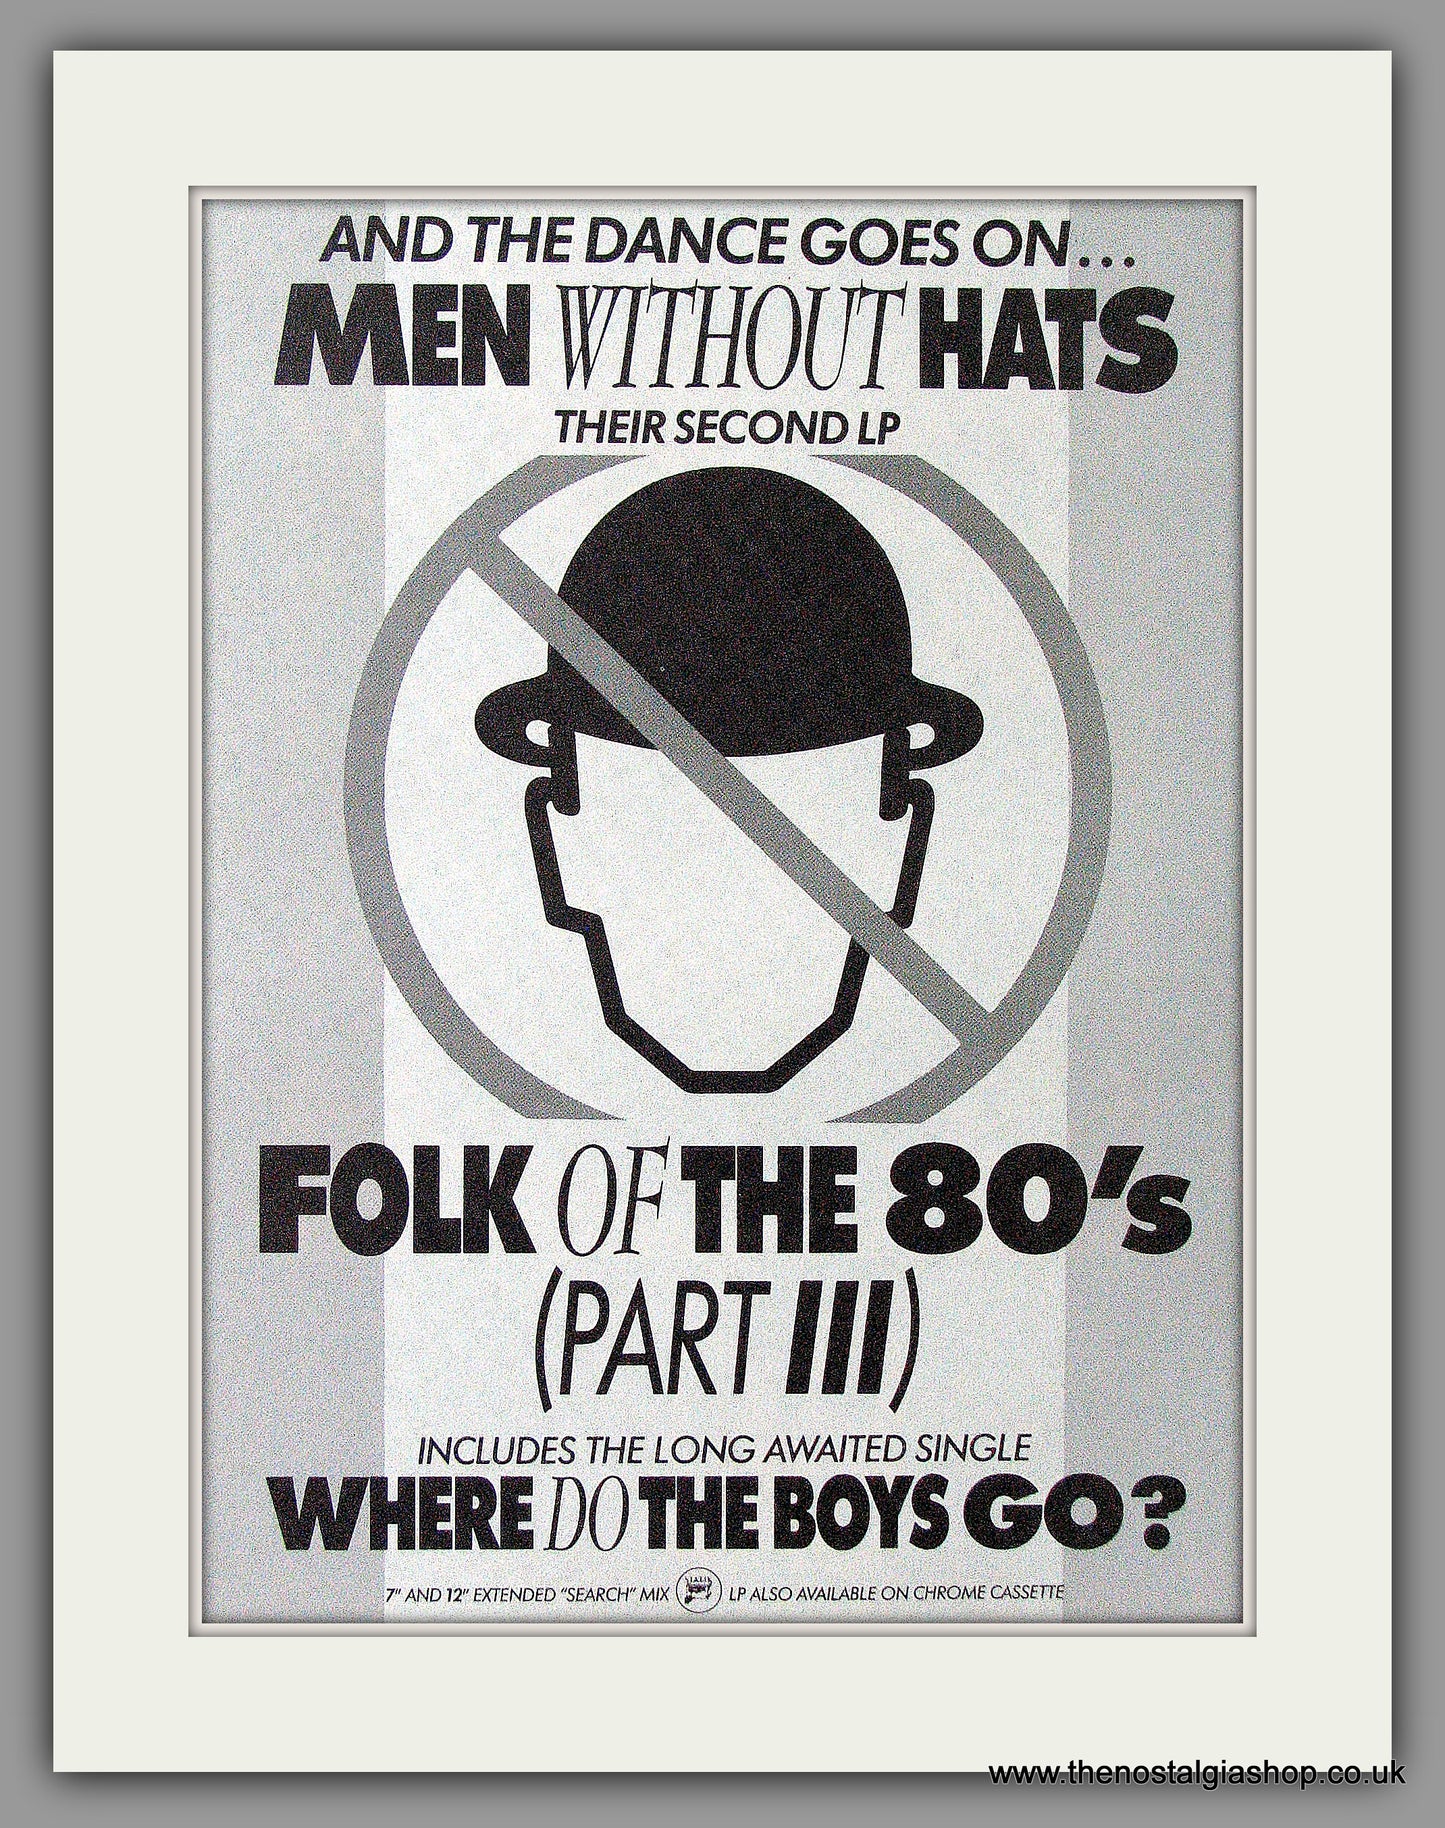 Men Without Hats. Folk Of The 80's Part III. 1984 Original Advert (ref AD54063)